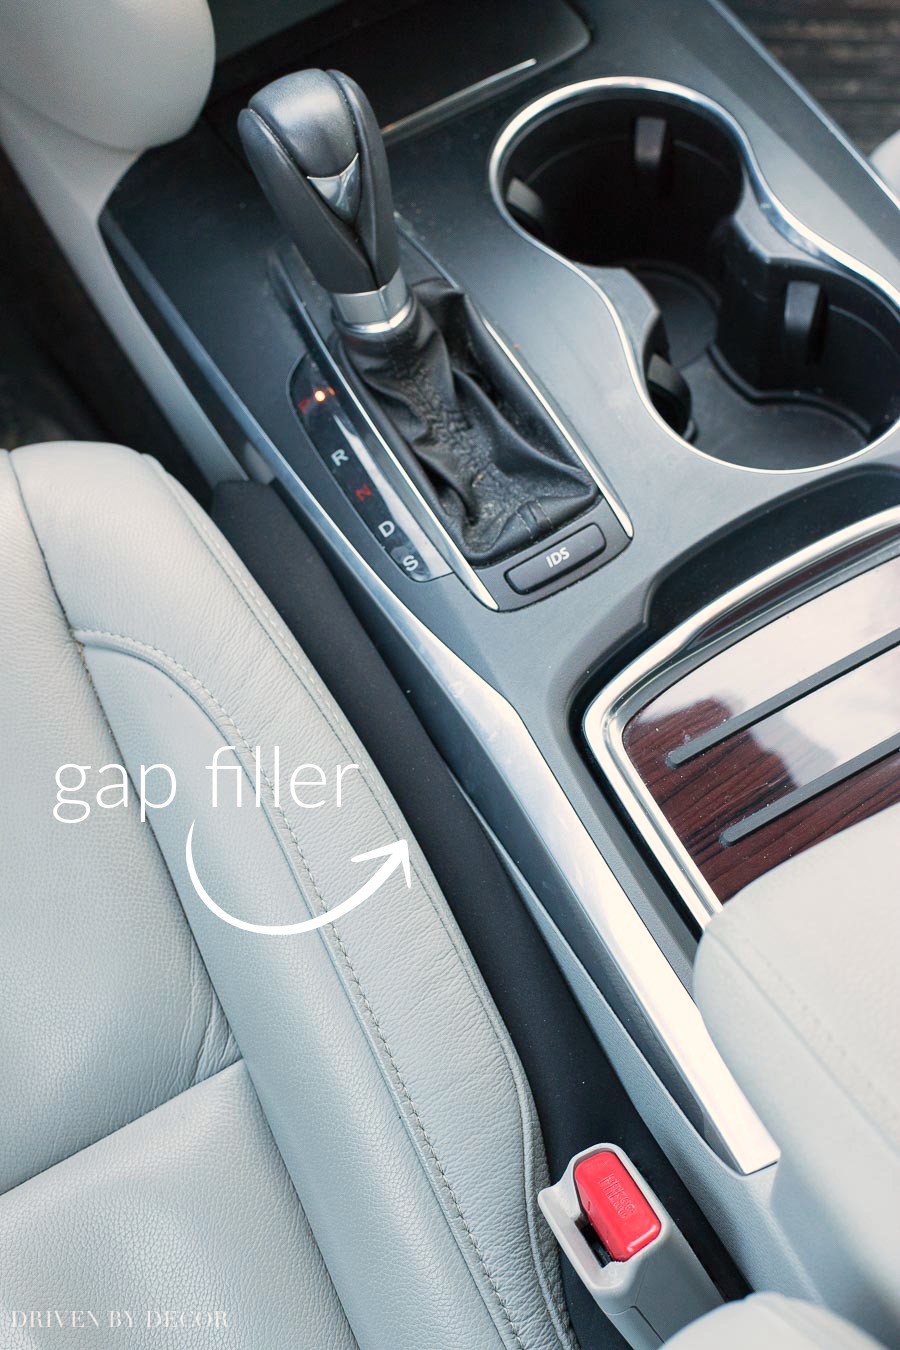 OMG I need this in my life! A car seat gap filler so there's no more cell phones or anything else falling down in that hard to reach spot between your seat and center console!